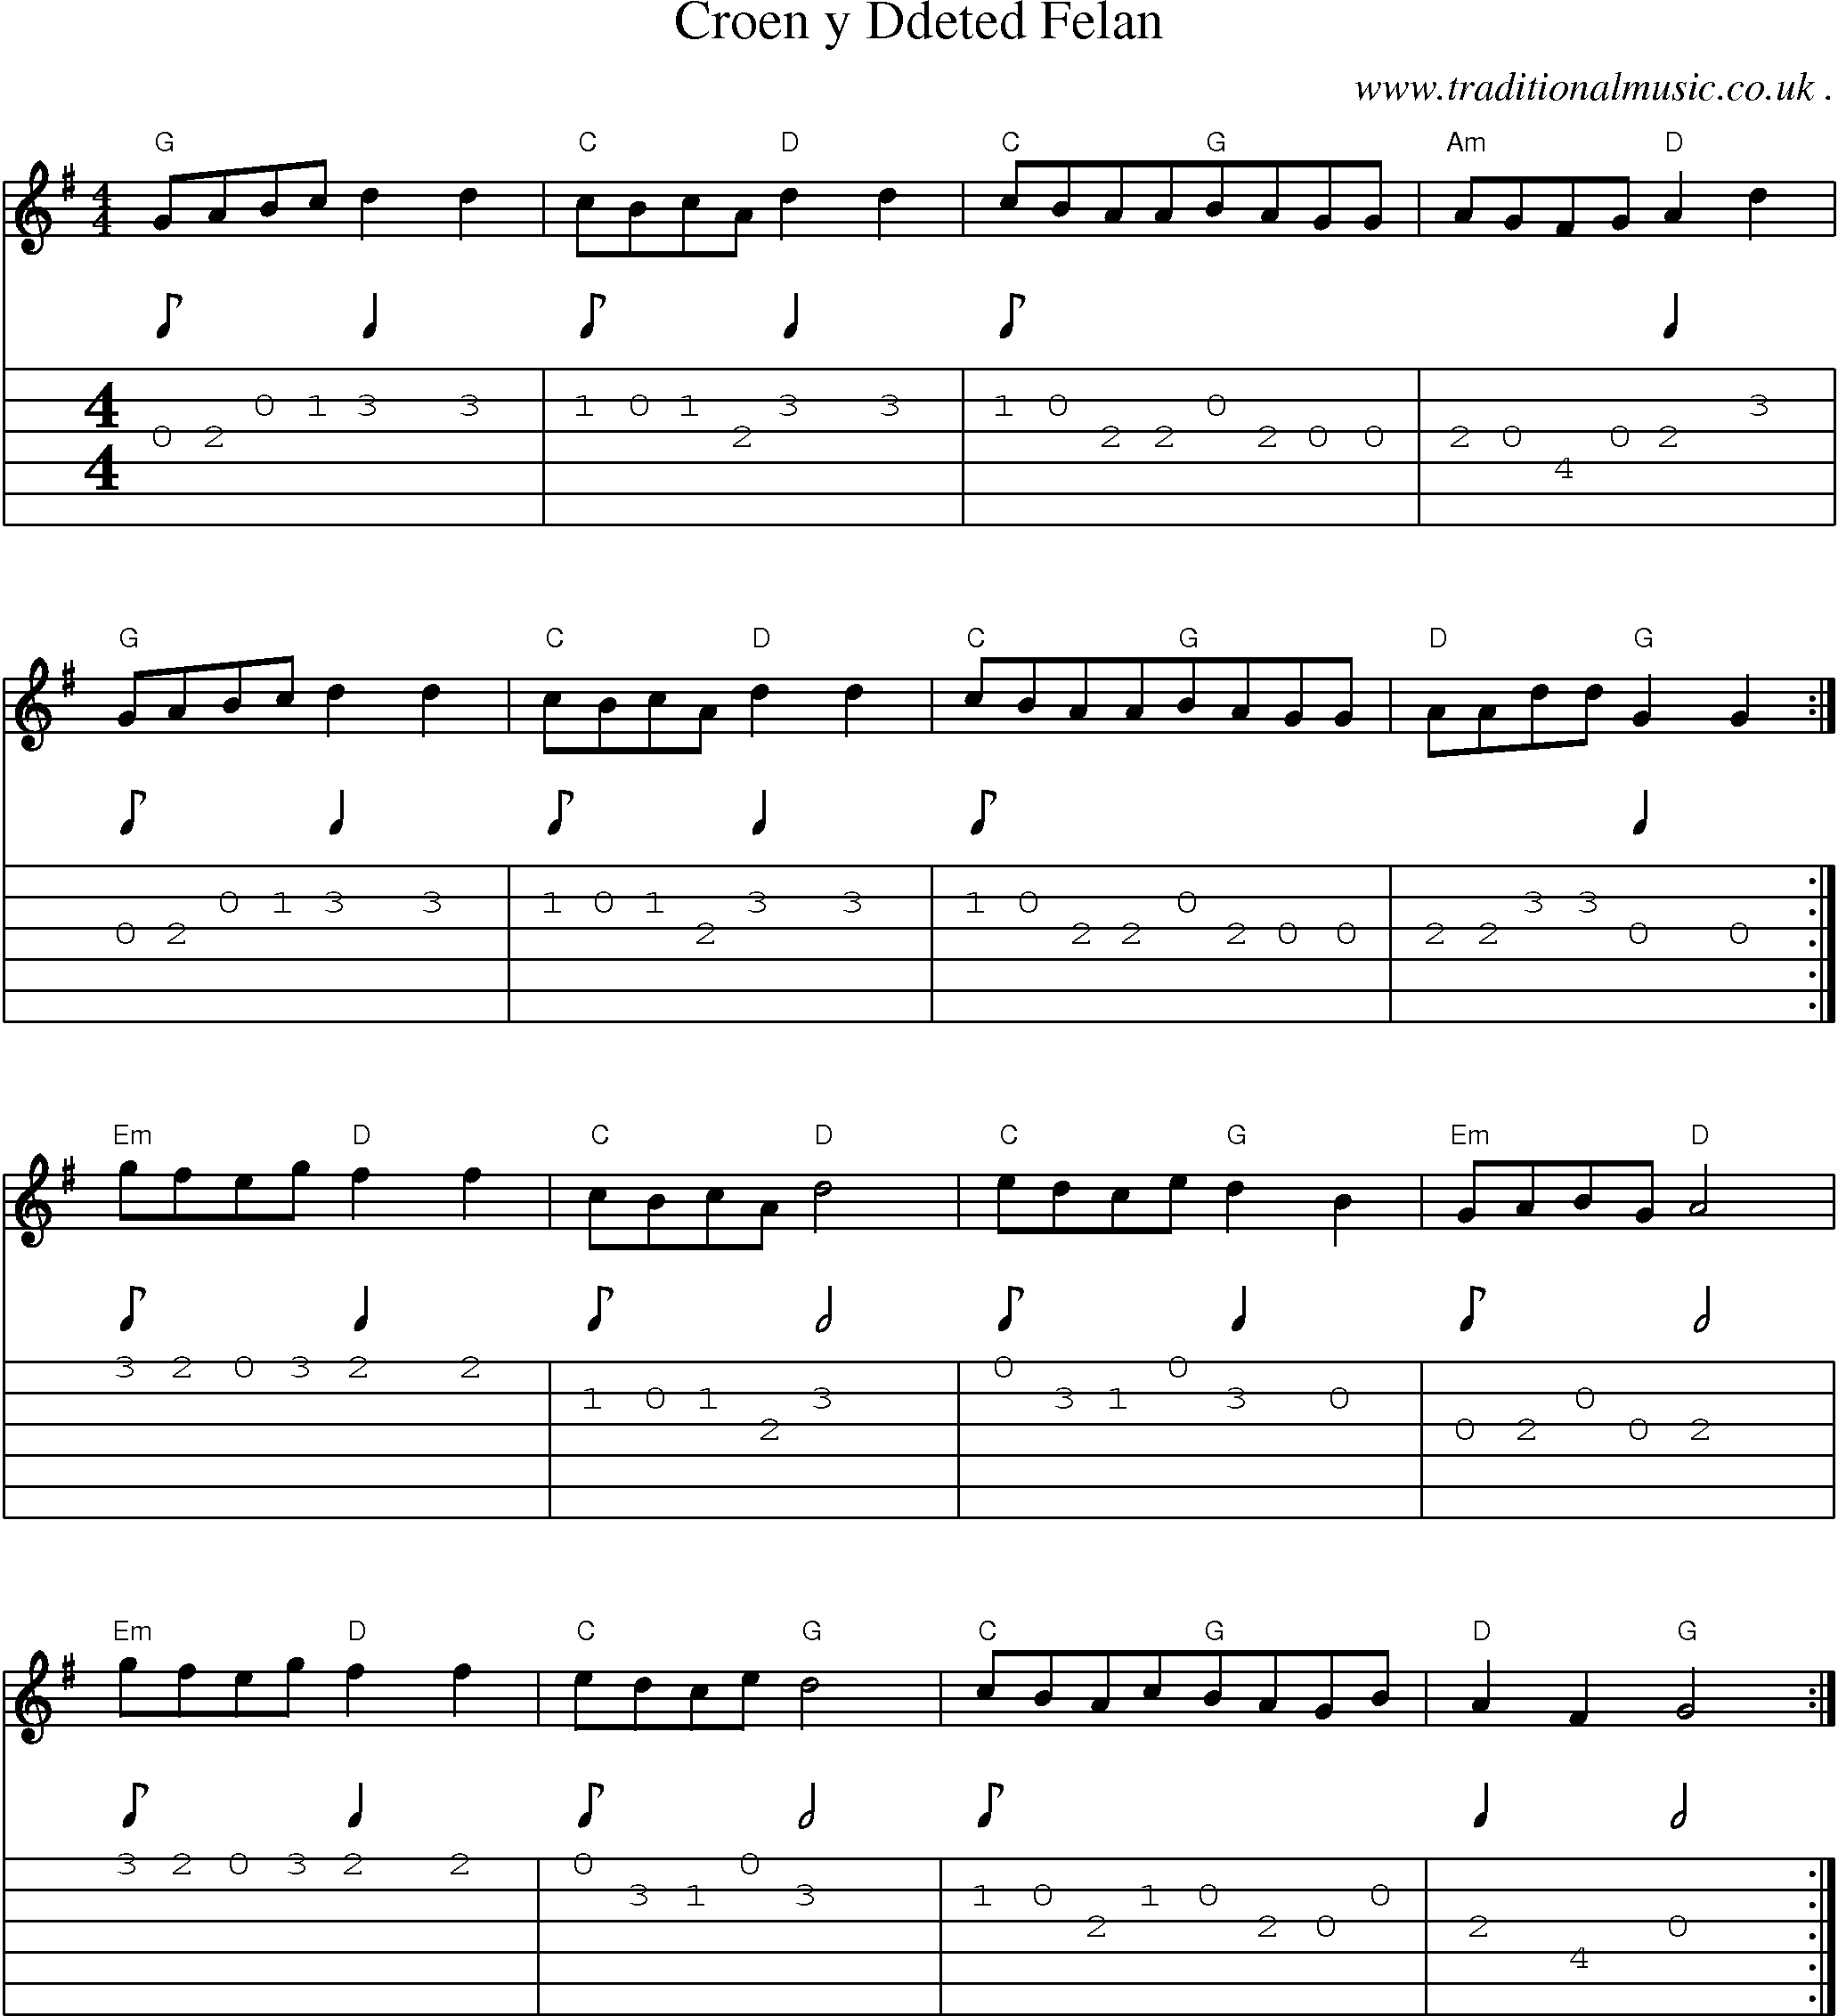 Sheet-Music and Guitar Tabs for Croen Y Ddeted Felan